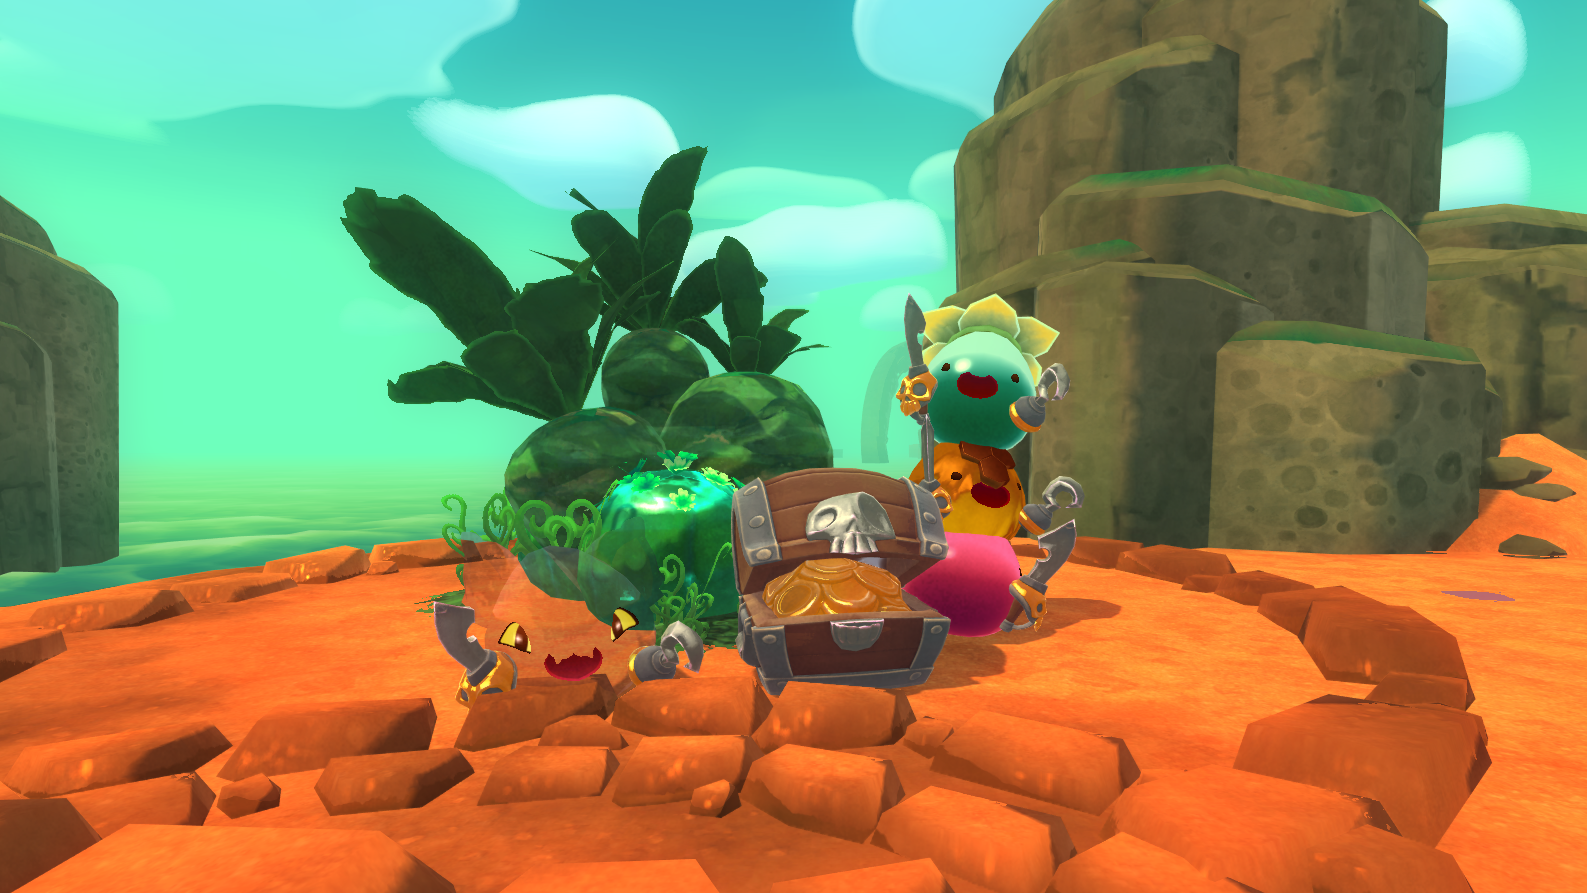 Slime Rancher Squelches onto PS4 in September